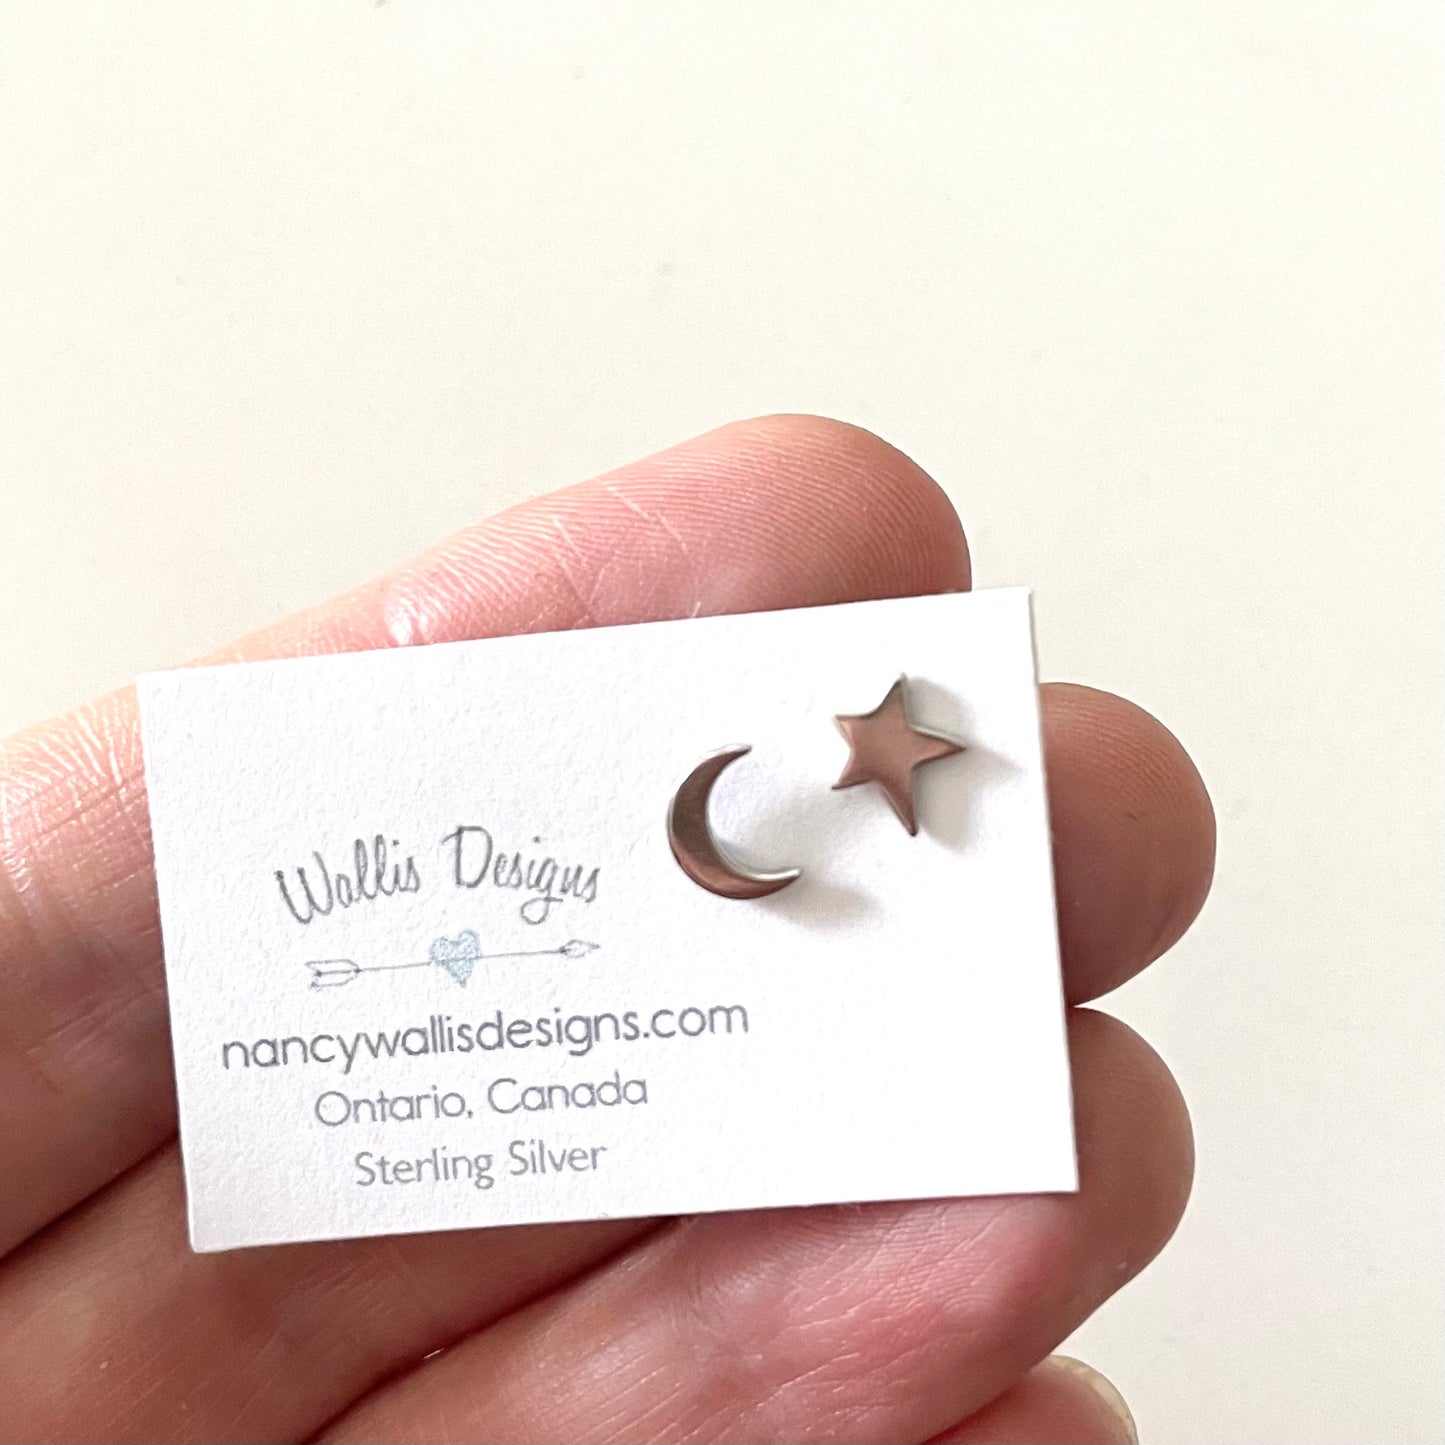 Tiny Silver Moon and Star Stud Earrings